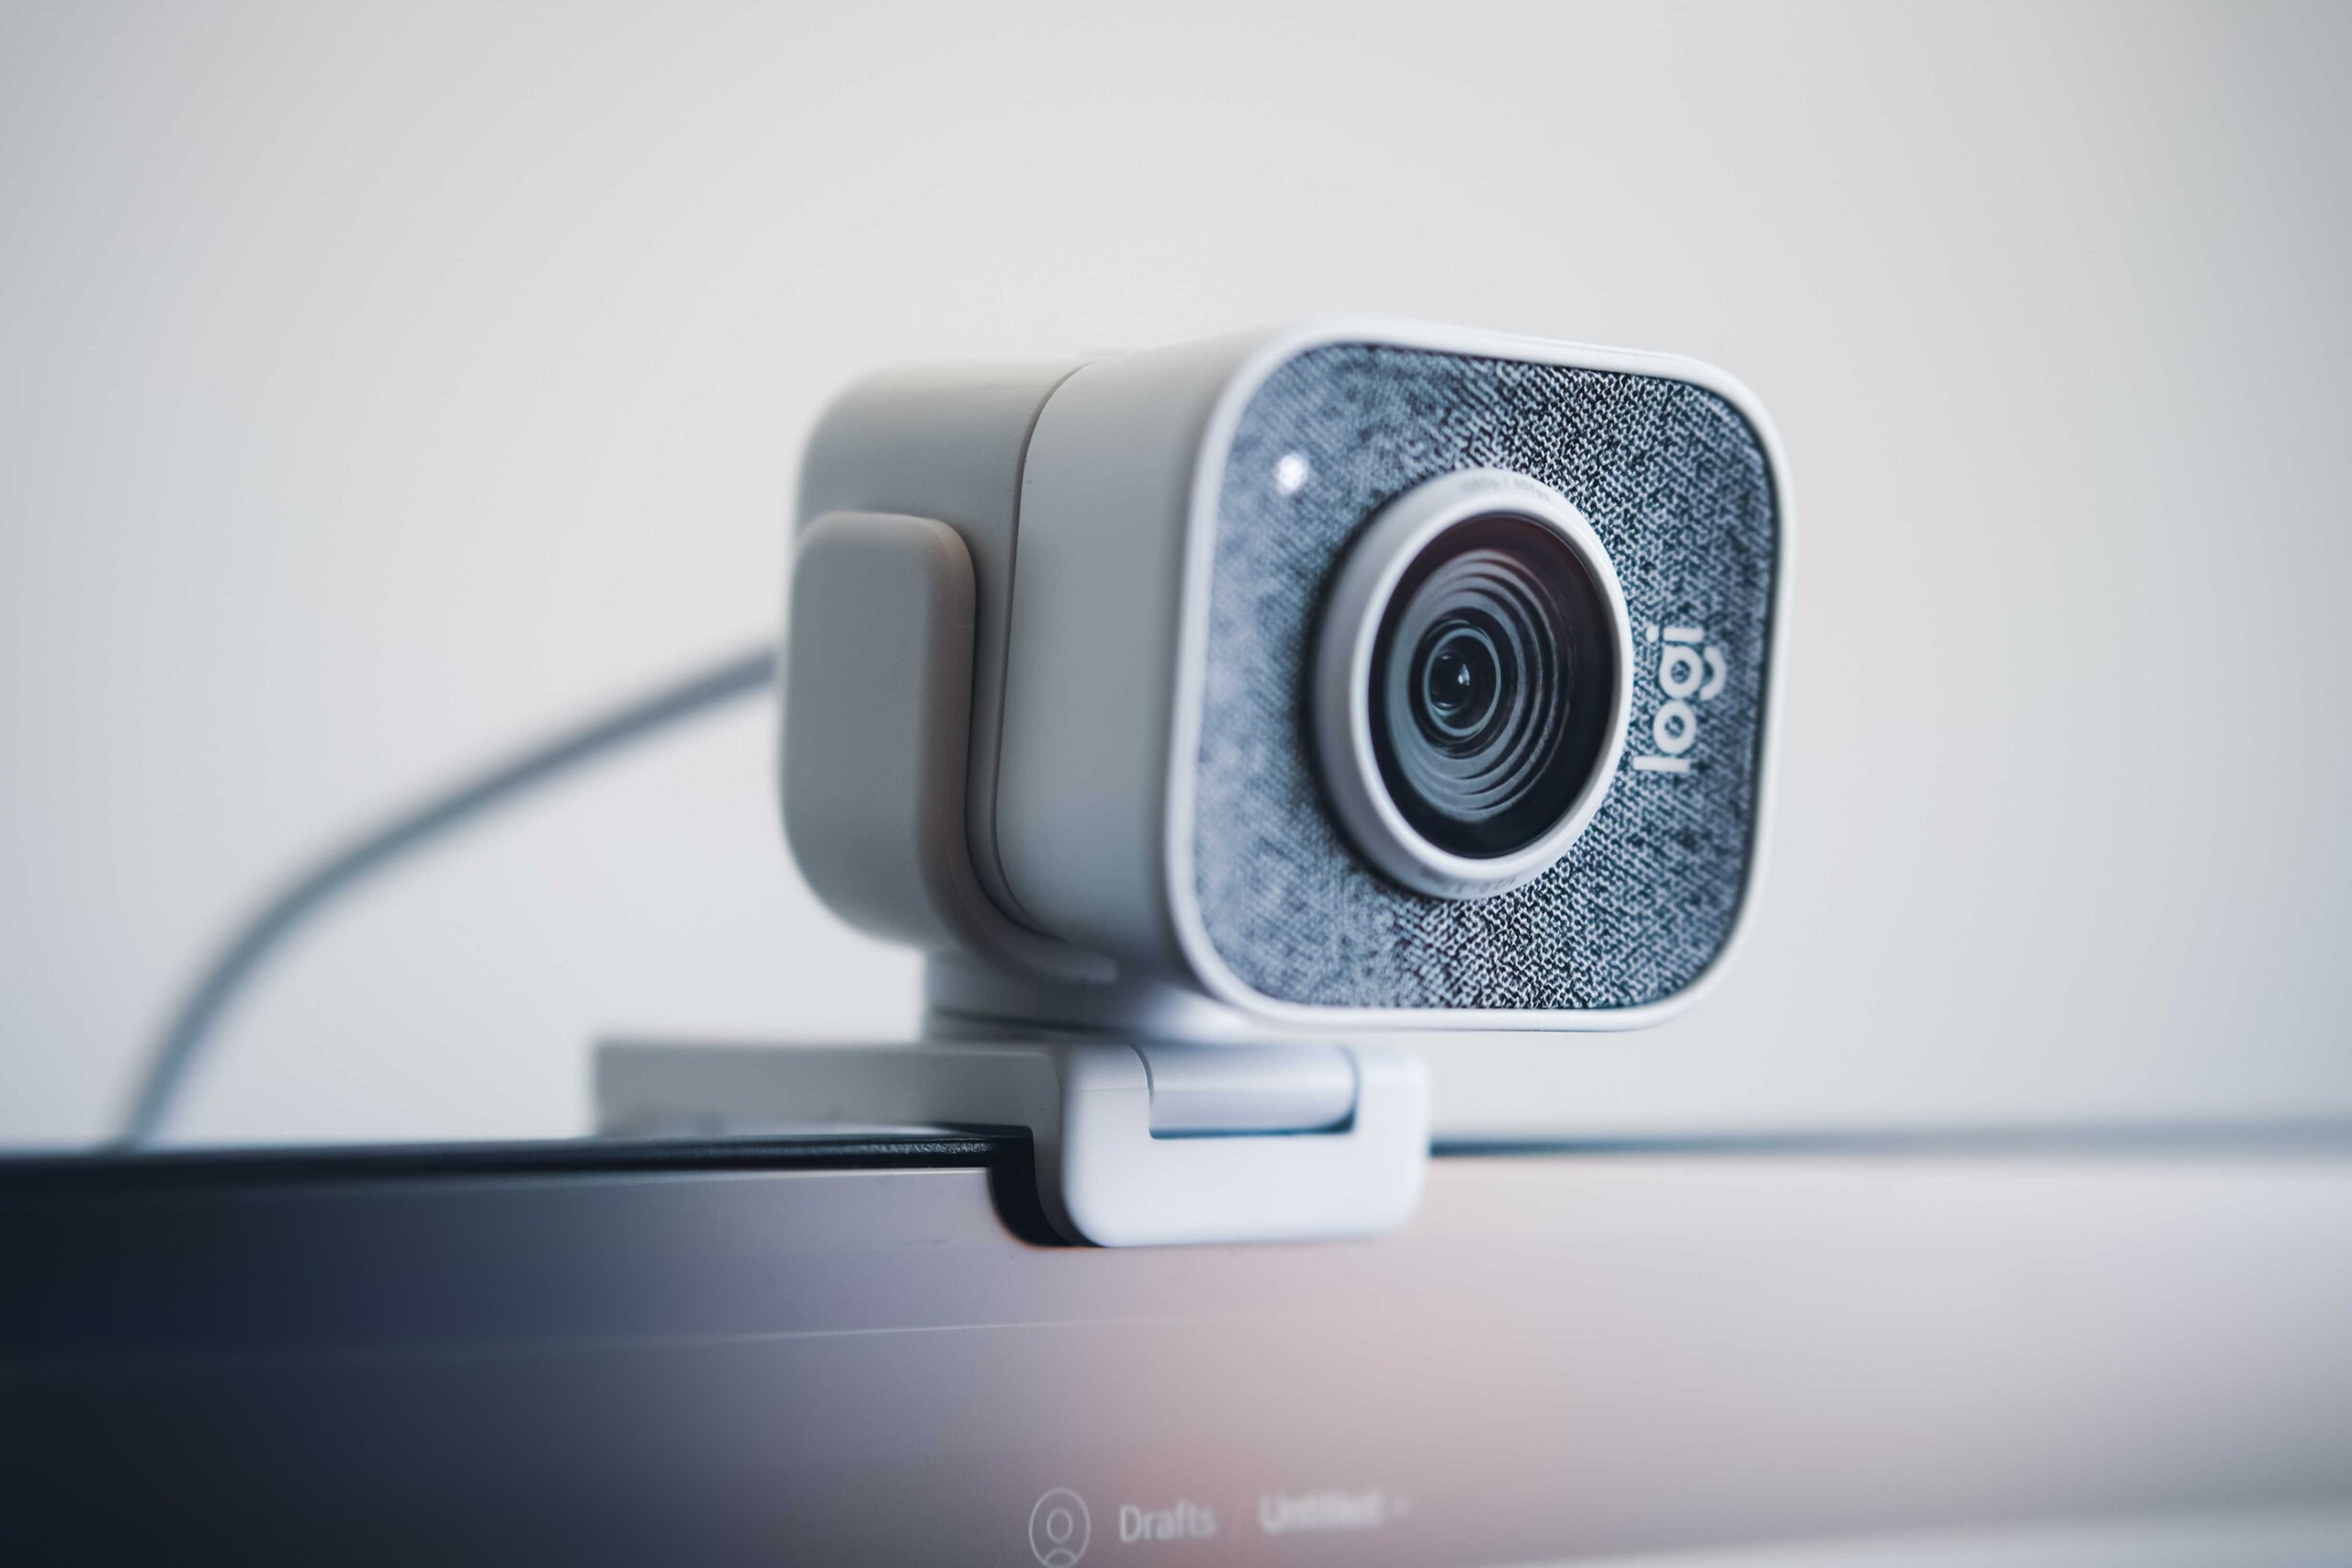 Barely Legal On Webcam - Video Chat and Webcams | Childnet